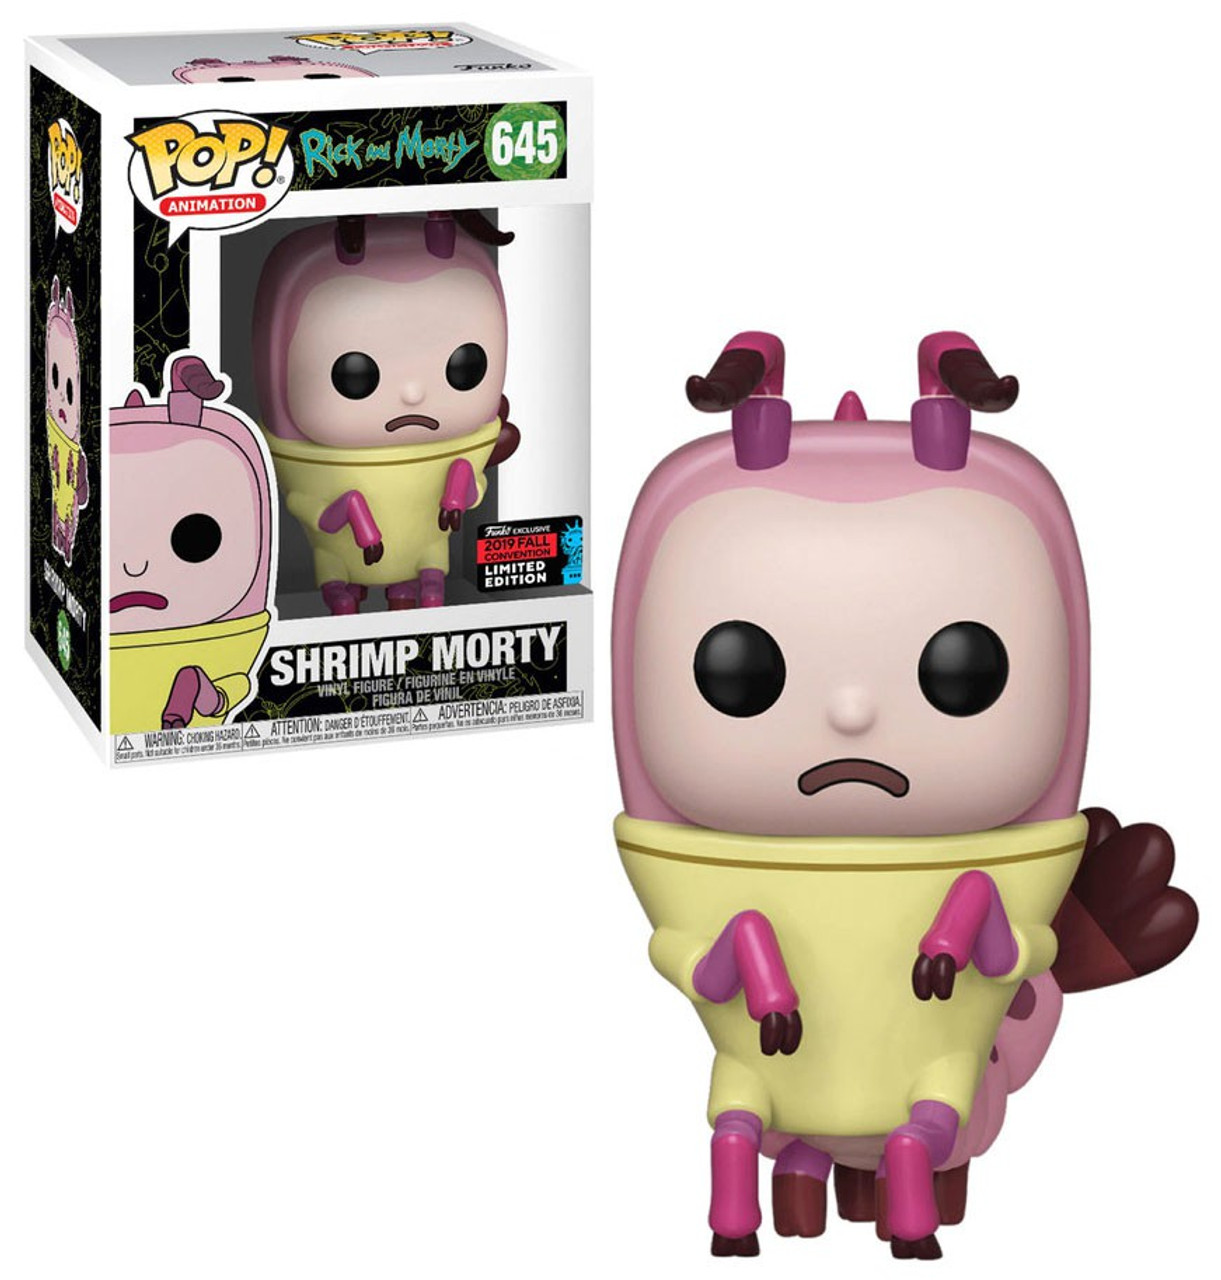 Rick and Morty Shrimp Morty Exclusive #645 Animation Bundled with Compatible Pop Box Protector Case Funko Pop 